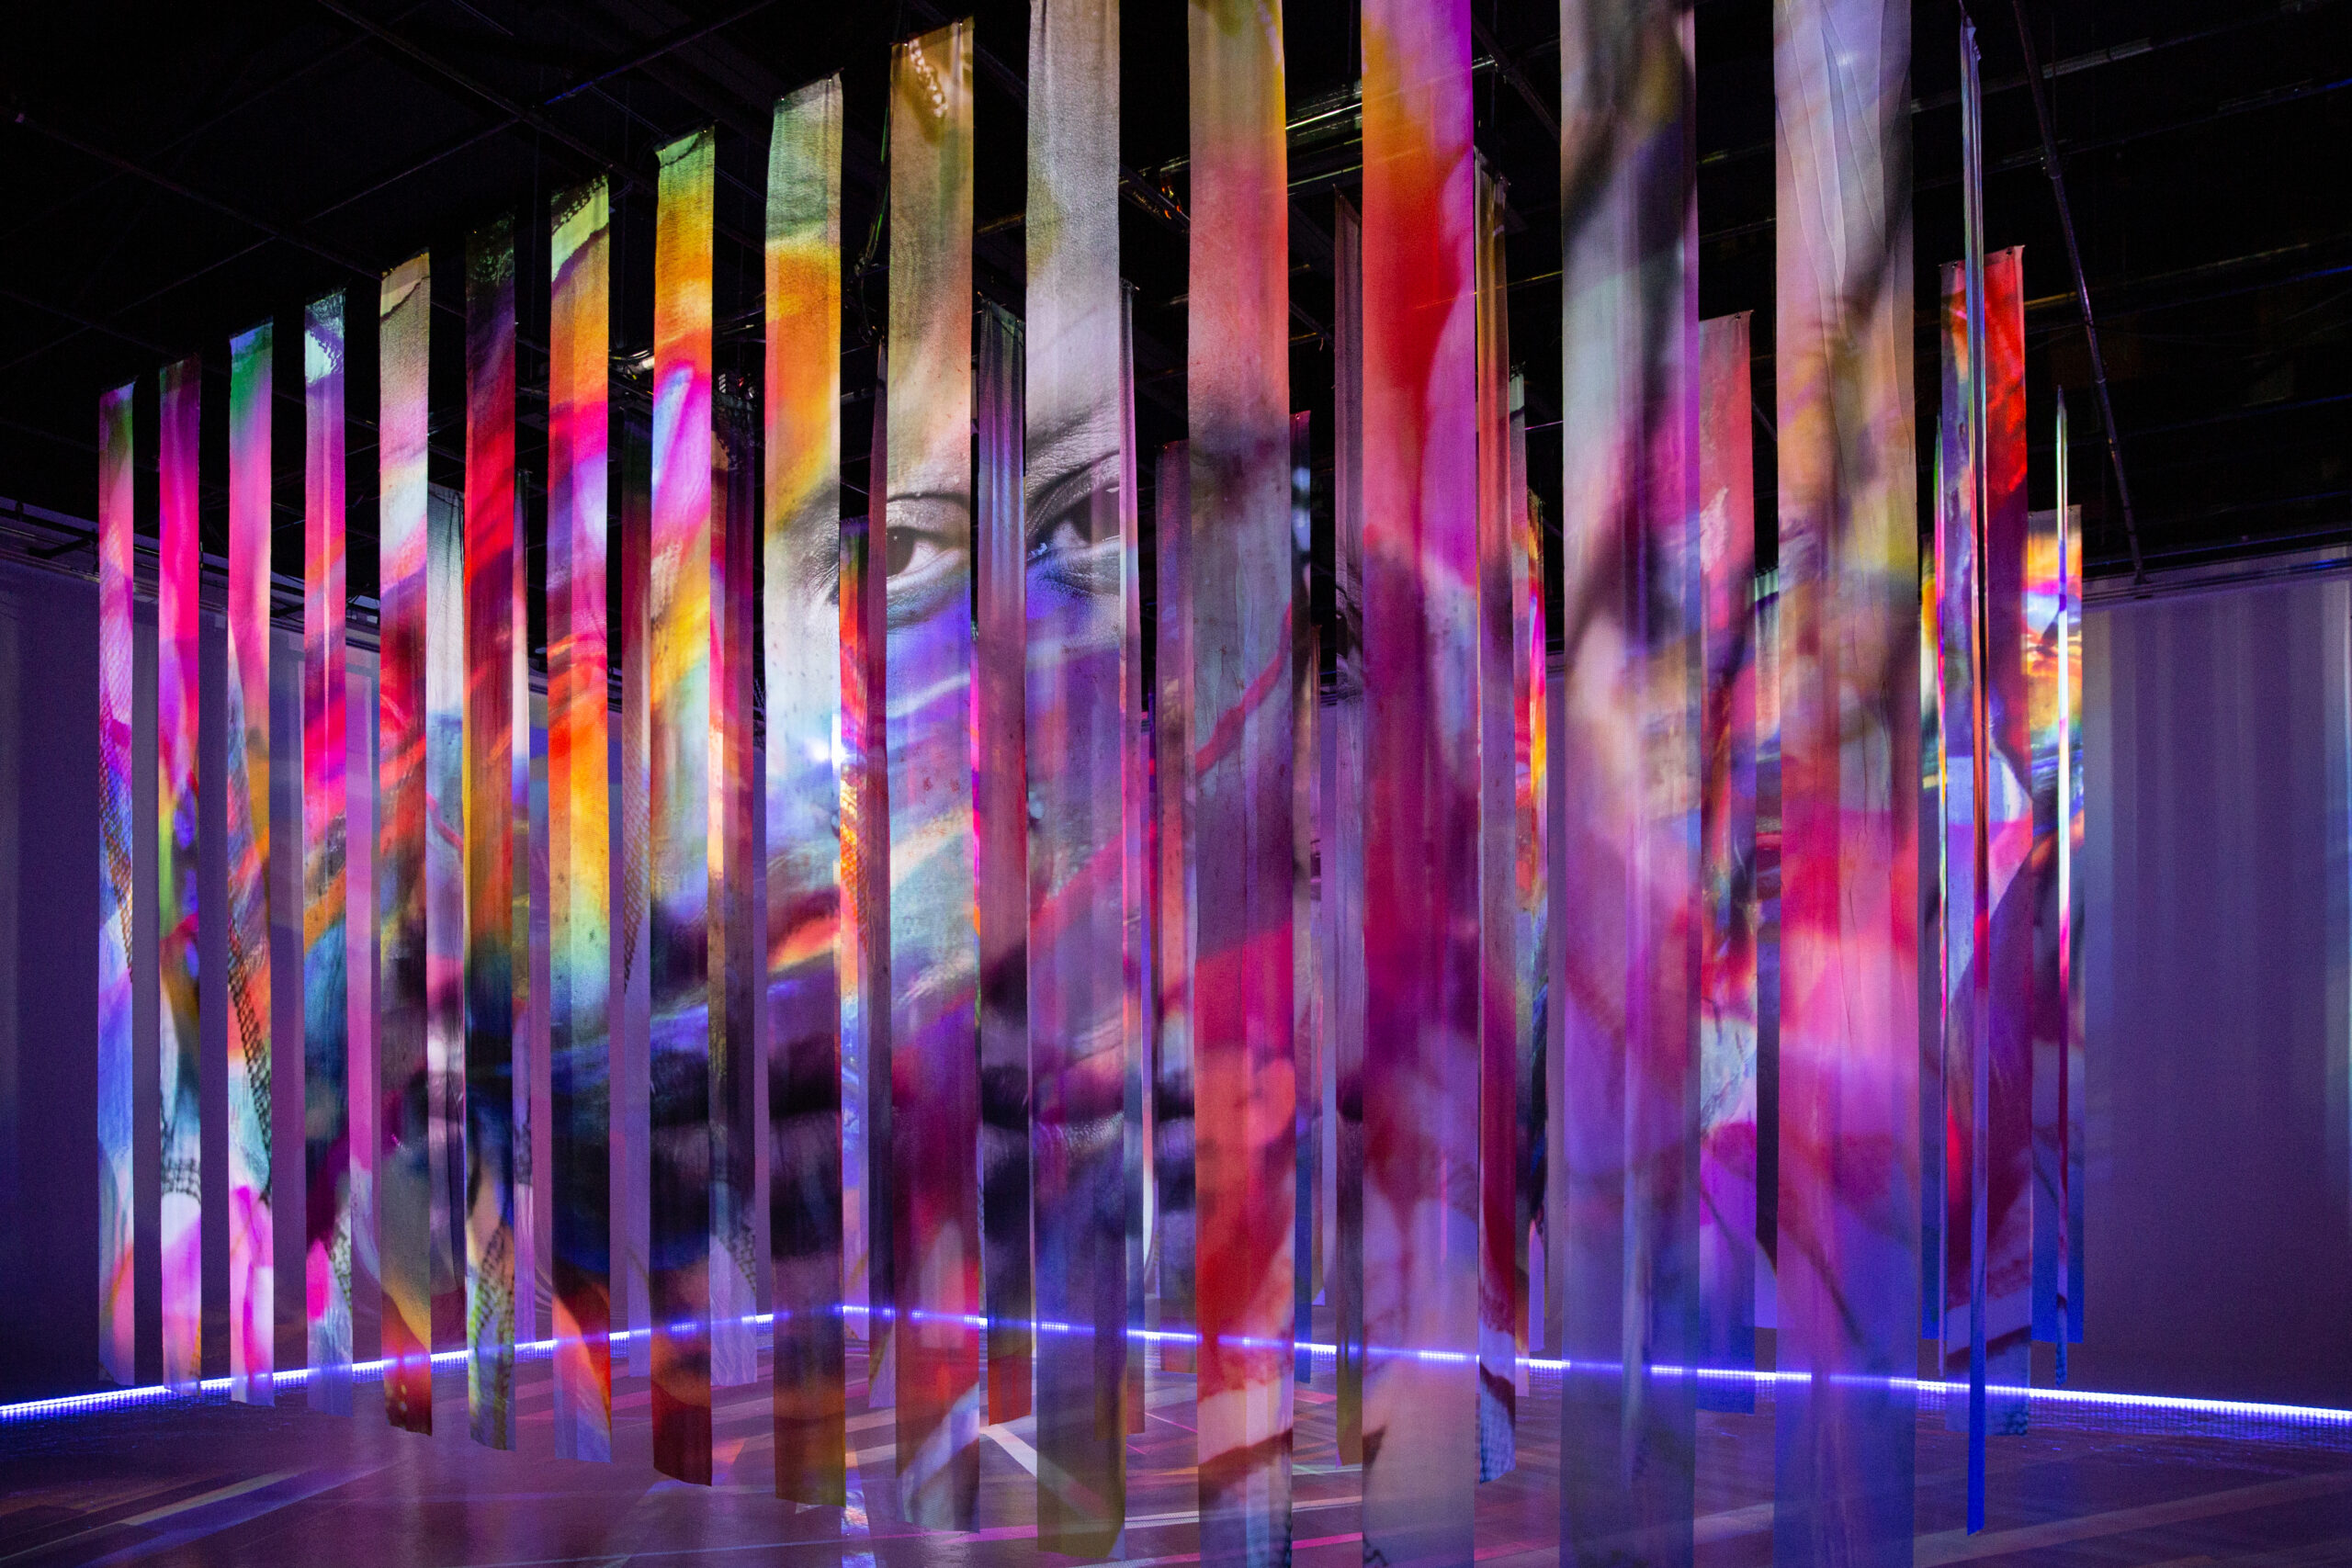 Epson Projectors Power 'Homebody' Immersive Art Experience at Ciel